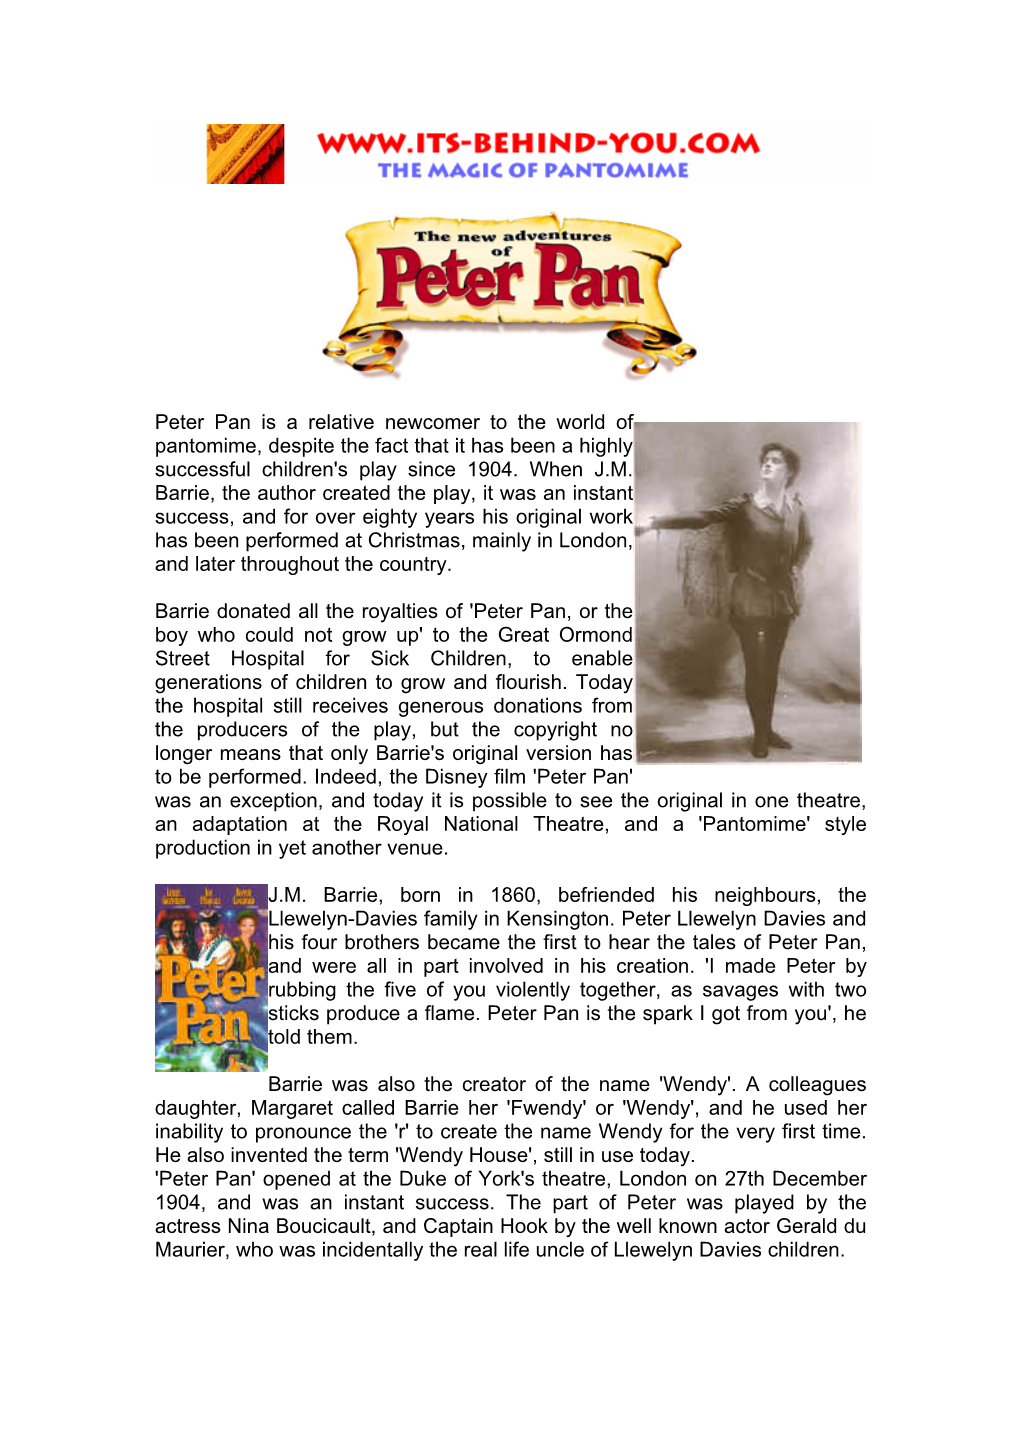 Peter Pan Is a Relative Newcomer to the World of Pantomime, Despite the Fact That It Has Been a Highly Successful Children's Play Since 1904